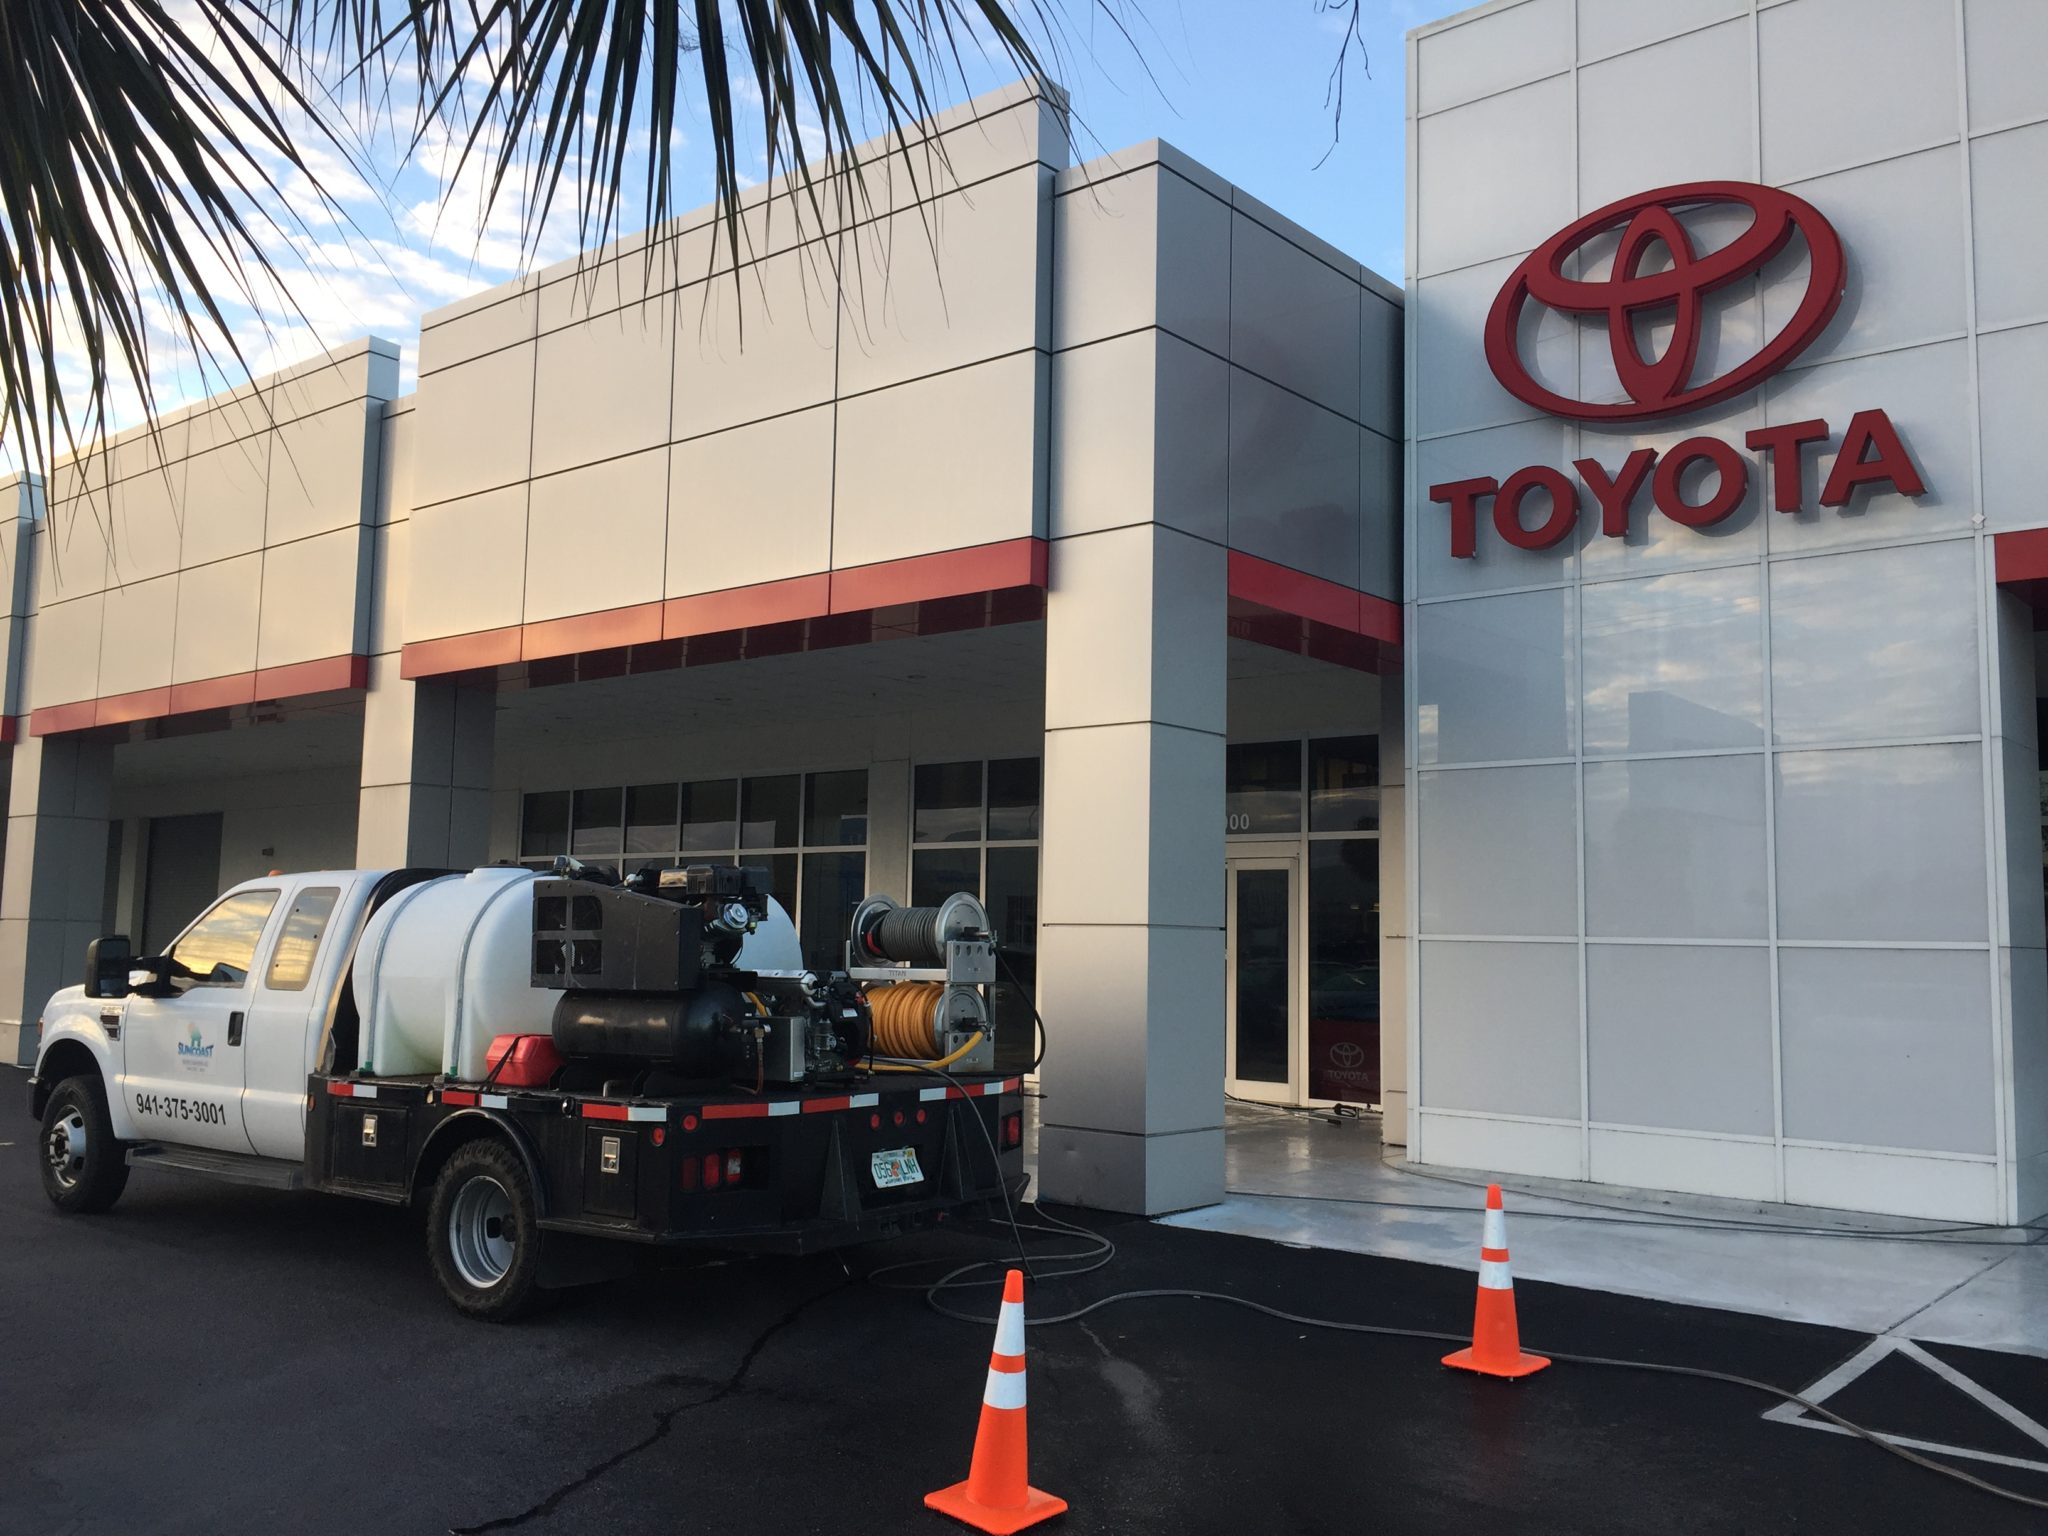 Toyota showroom cleaning by Suncoast Roof Cleaning in Sarasota